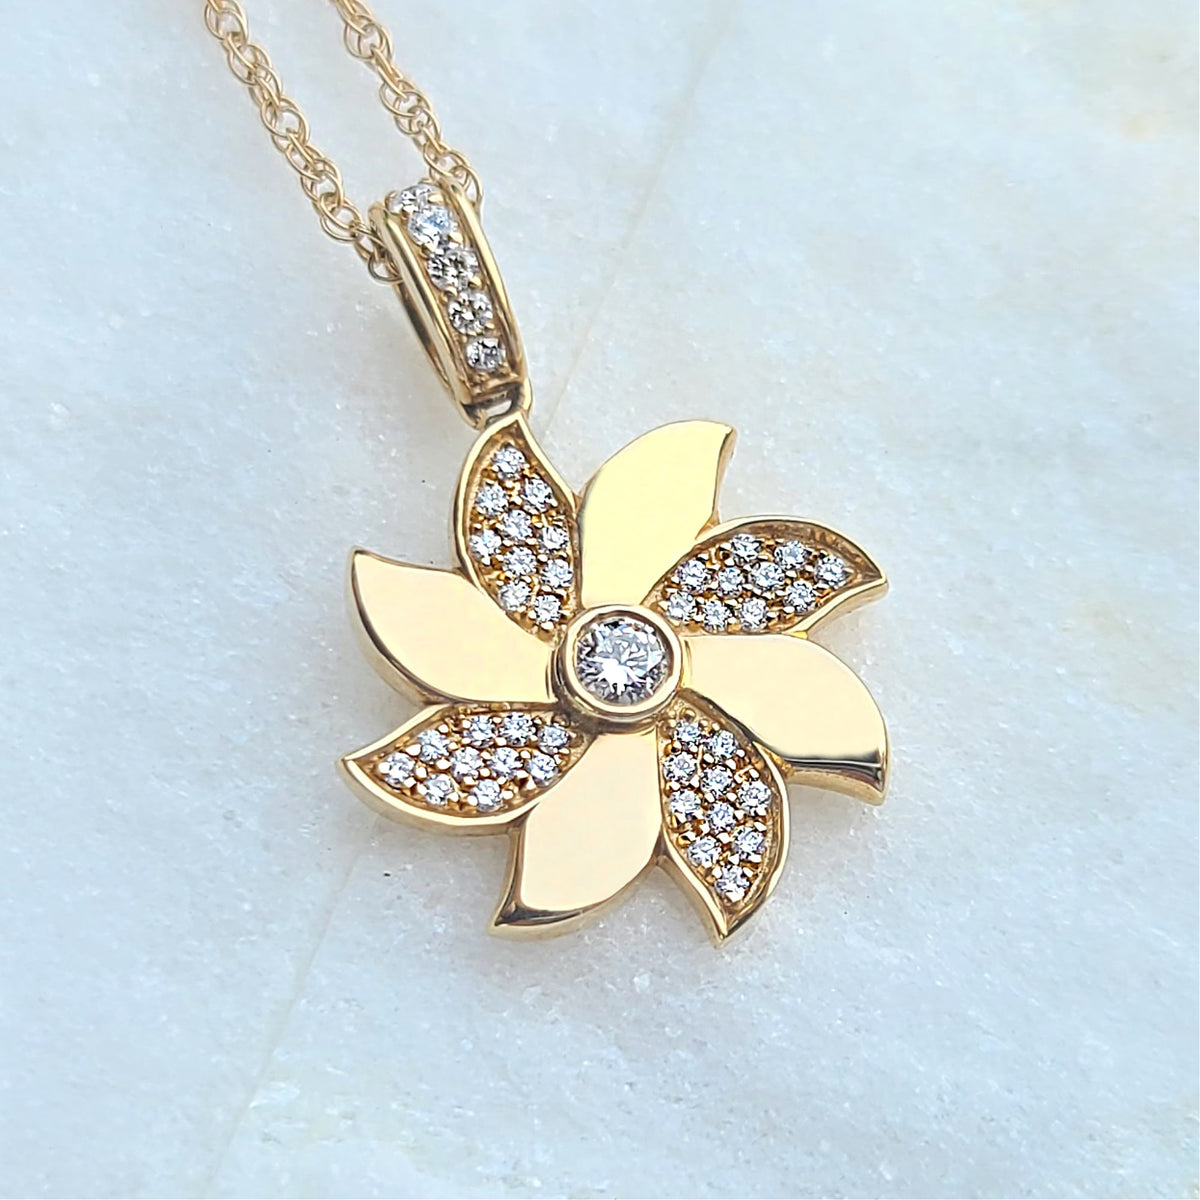 Sincerely Ginger Jewelry 14K Yellow Gold Pinwheel Diamond Necklace